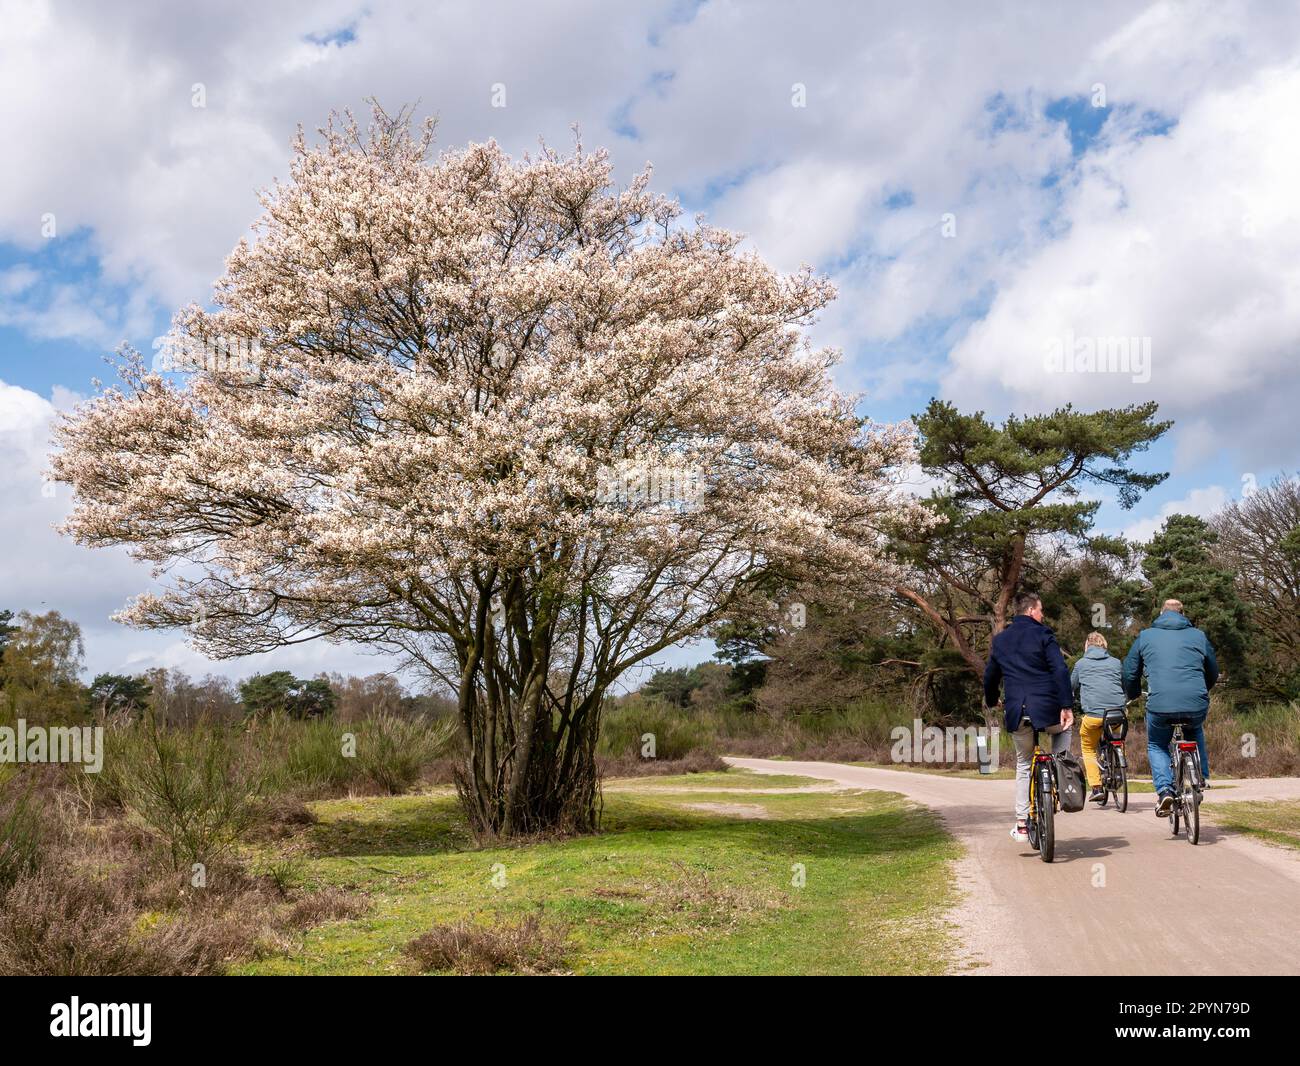 People riding bicycles on bike path and juneberry tree, Amelanchier lamarkii, blooming in spring in nature reserve, Netherlands Stock Photo